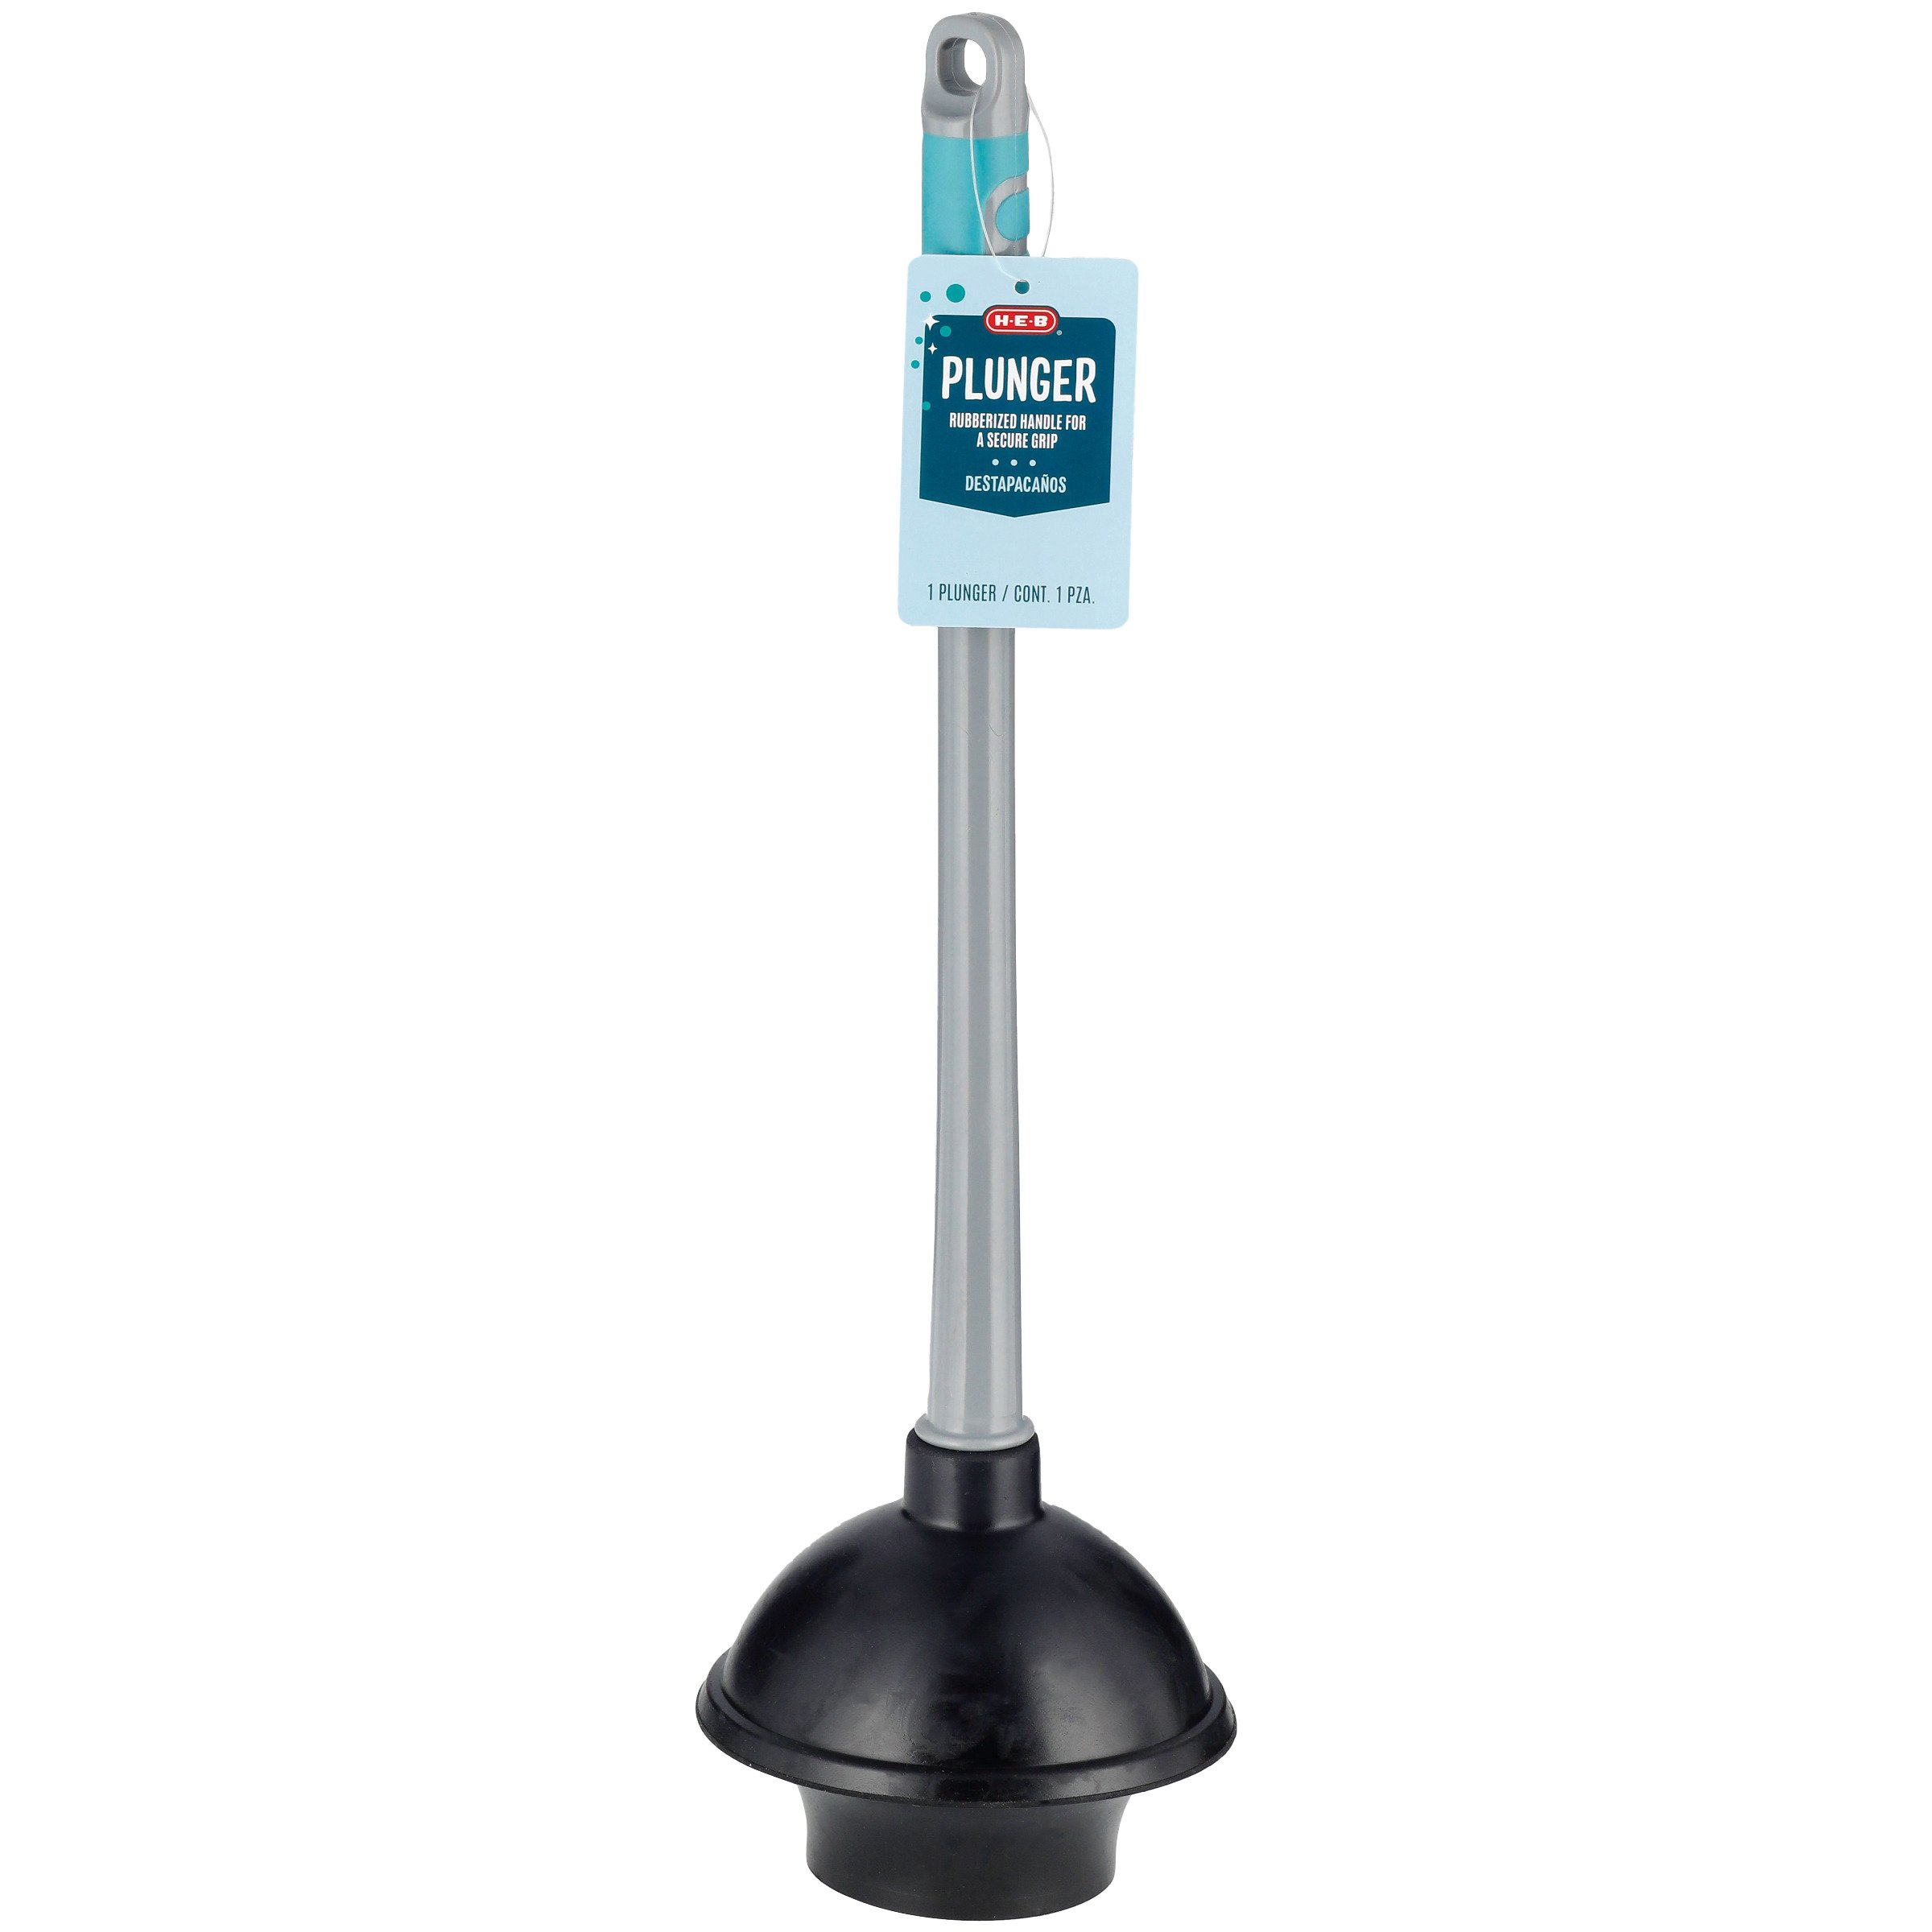 Mr. Clean Mini Sink and Drain Plunger - Shop Plumbing at H-E-B